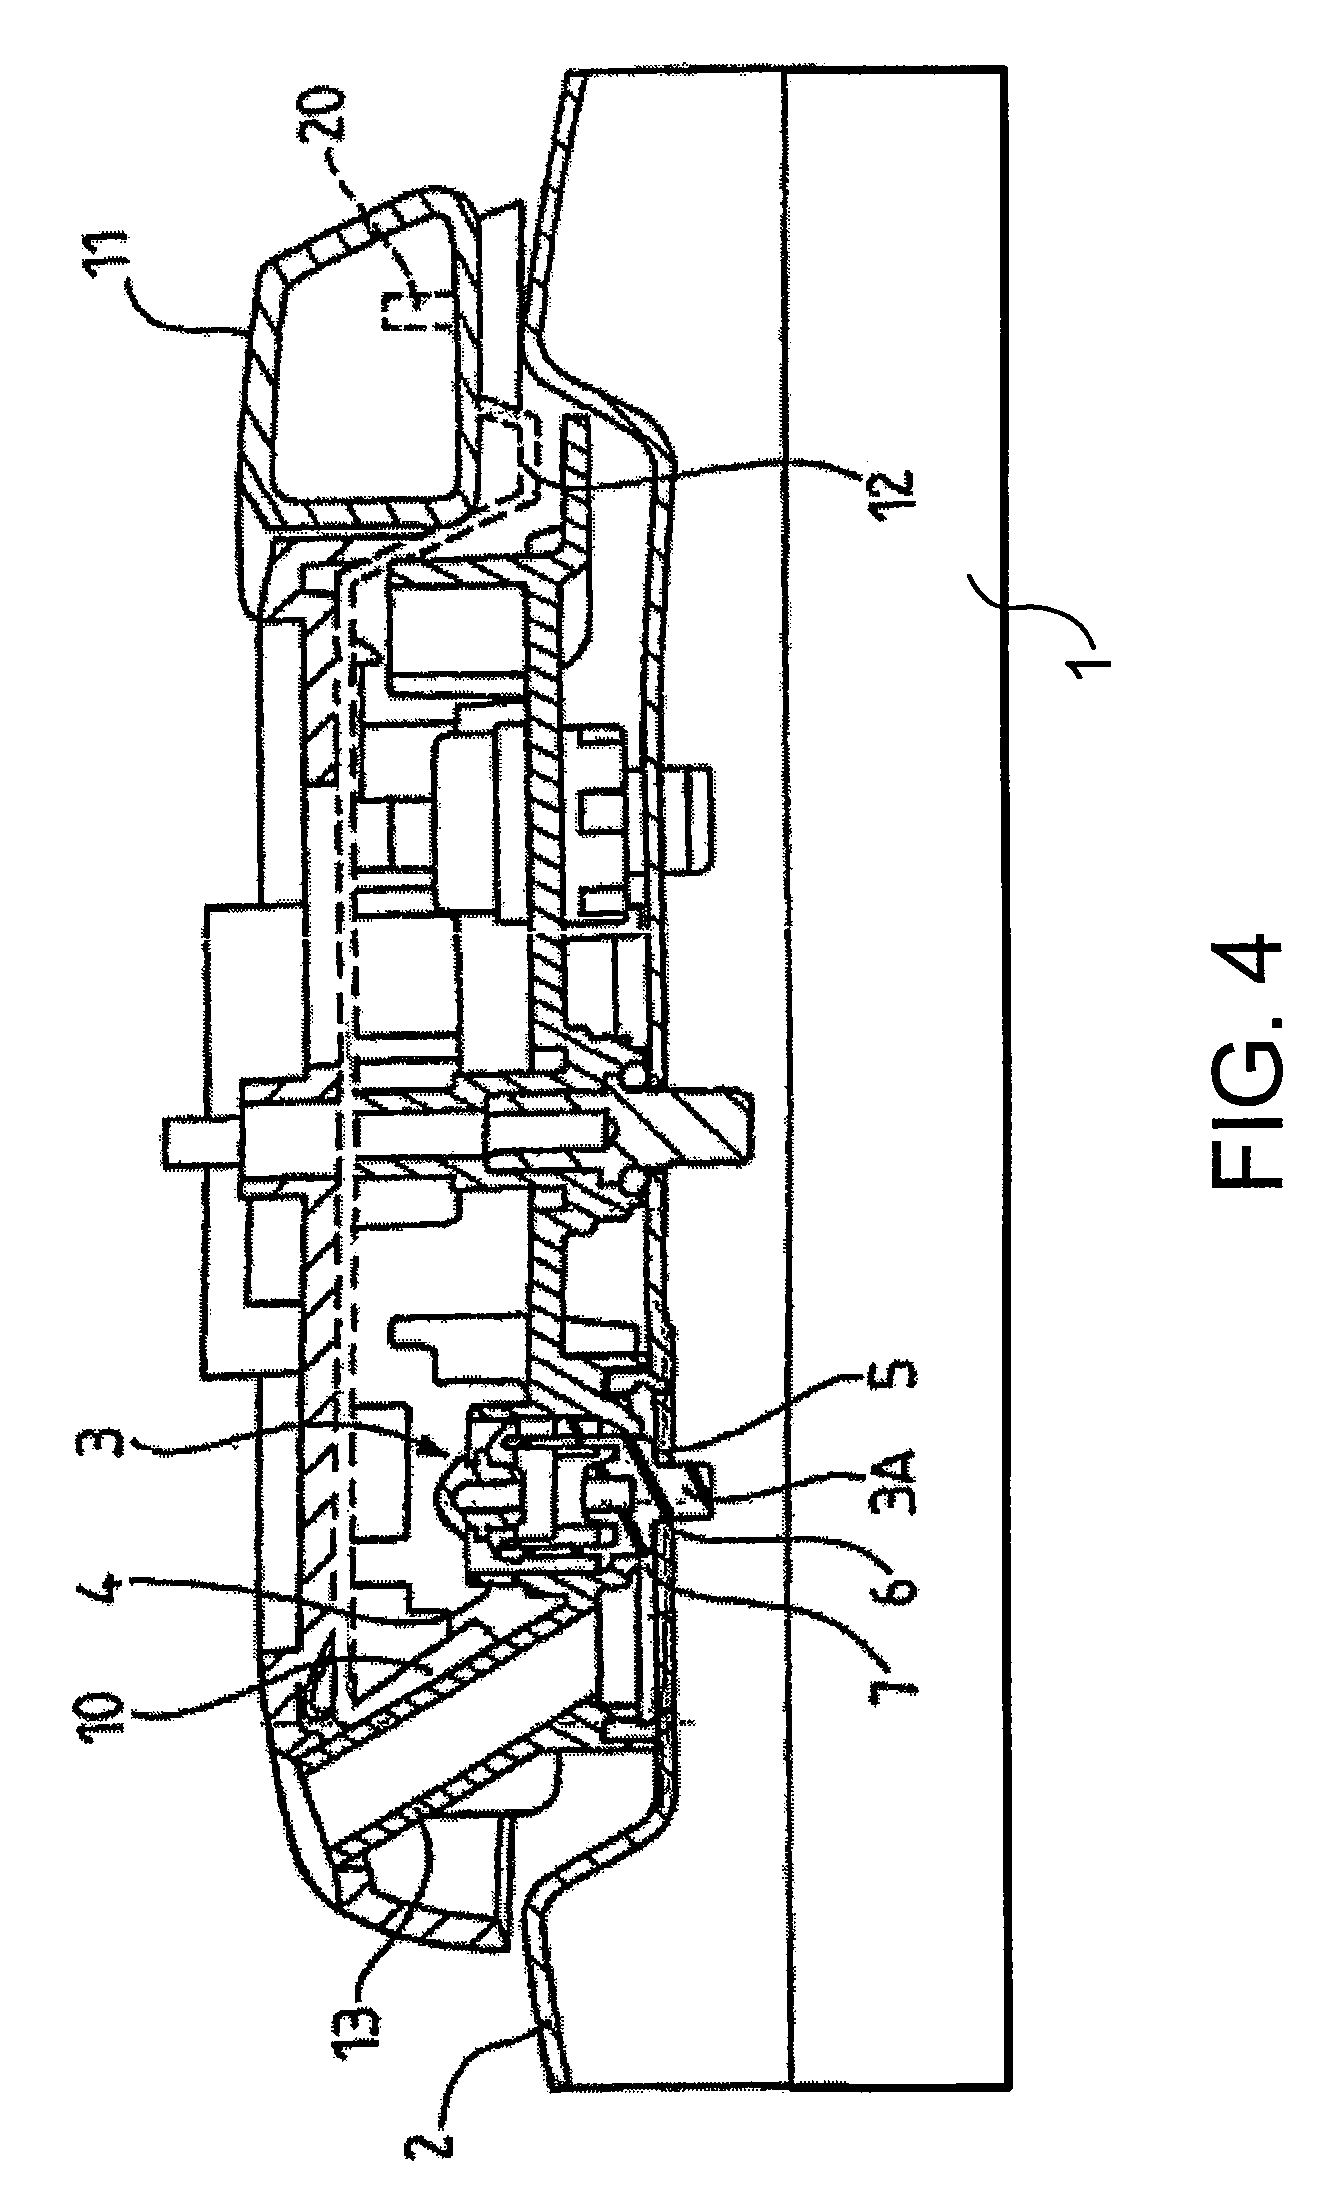 Appliance for cooking foods under pressure comprising a temperature sensor